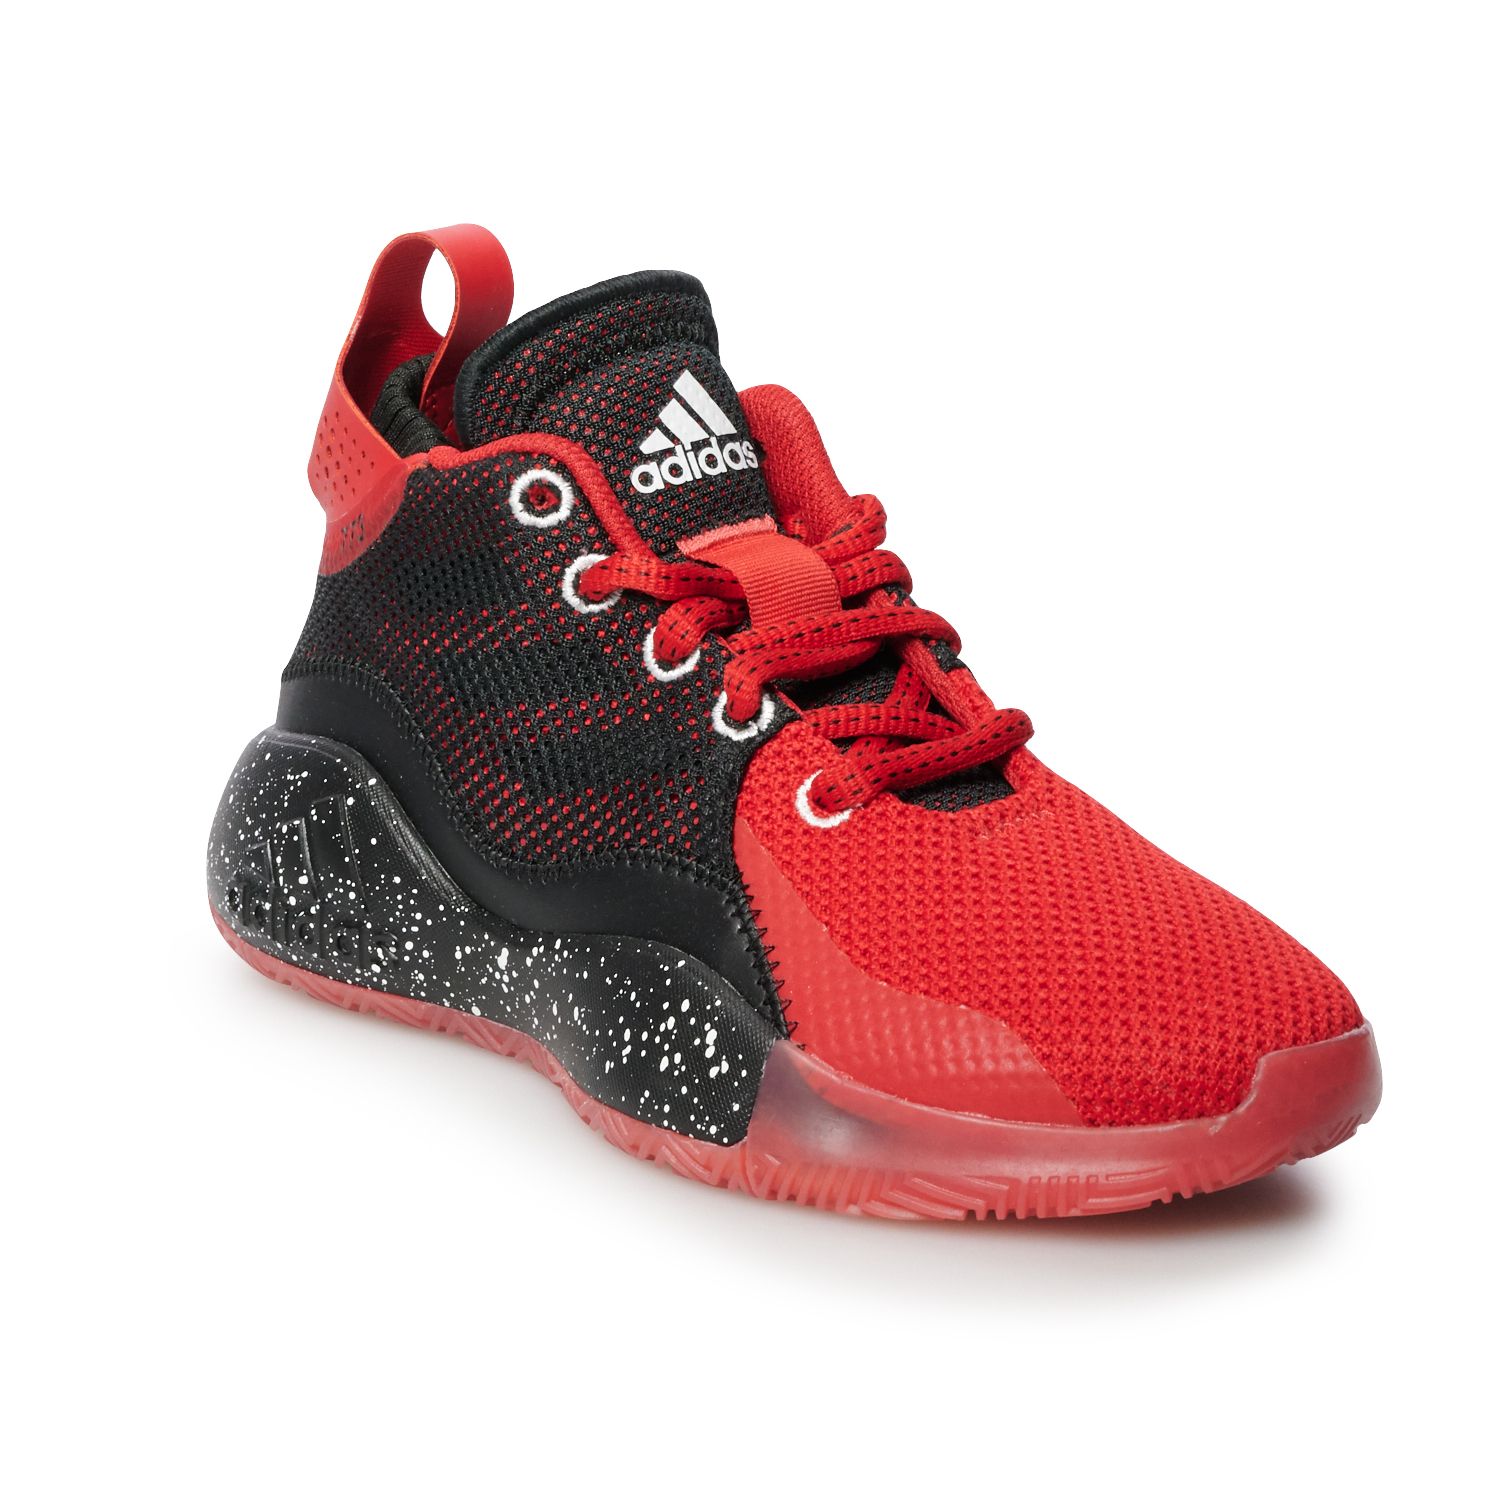 adidas performance d rose 773 2020 shoes